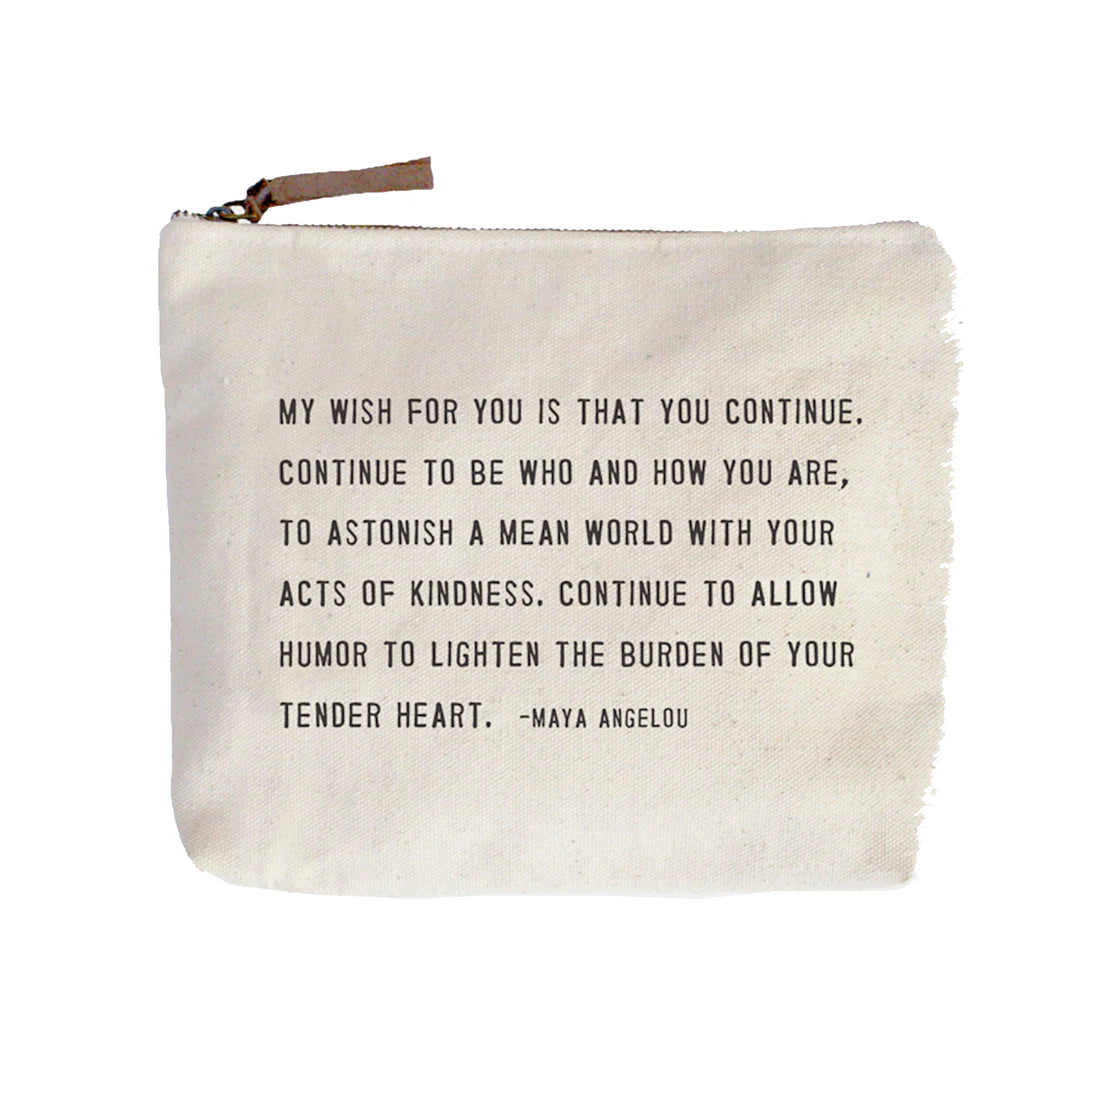 Sugarboo - Pouch - Canvas with Quote